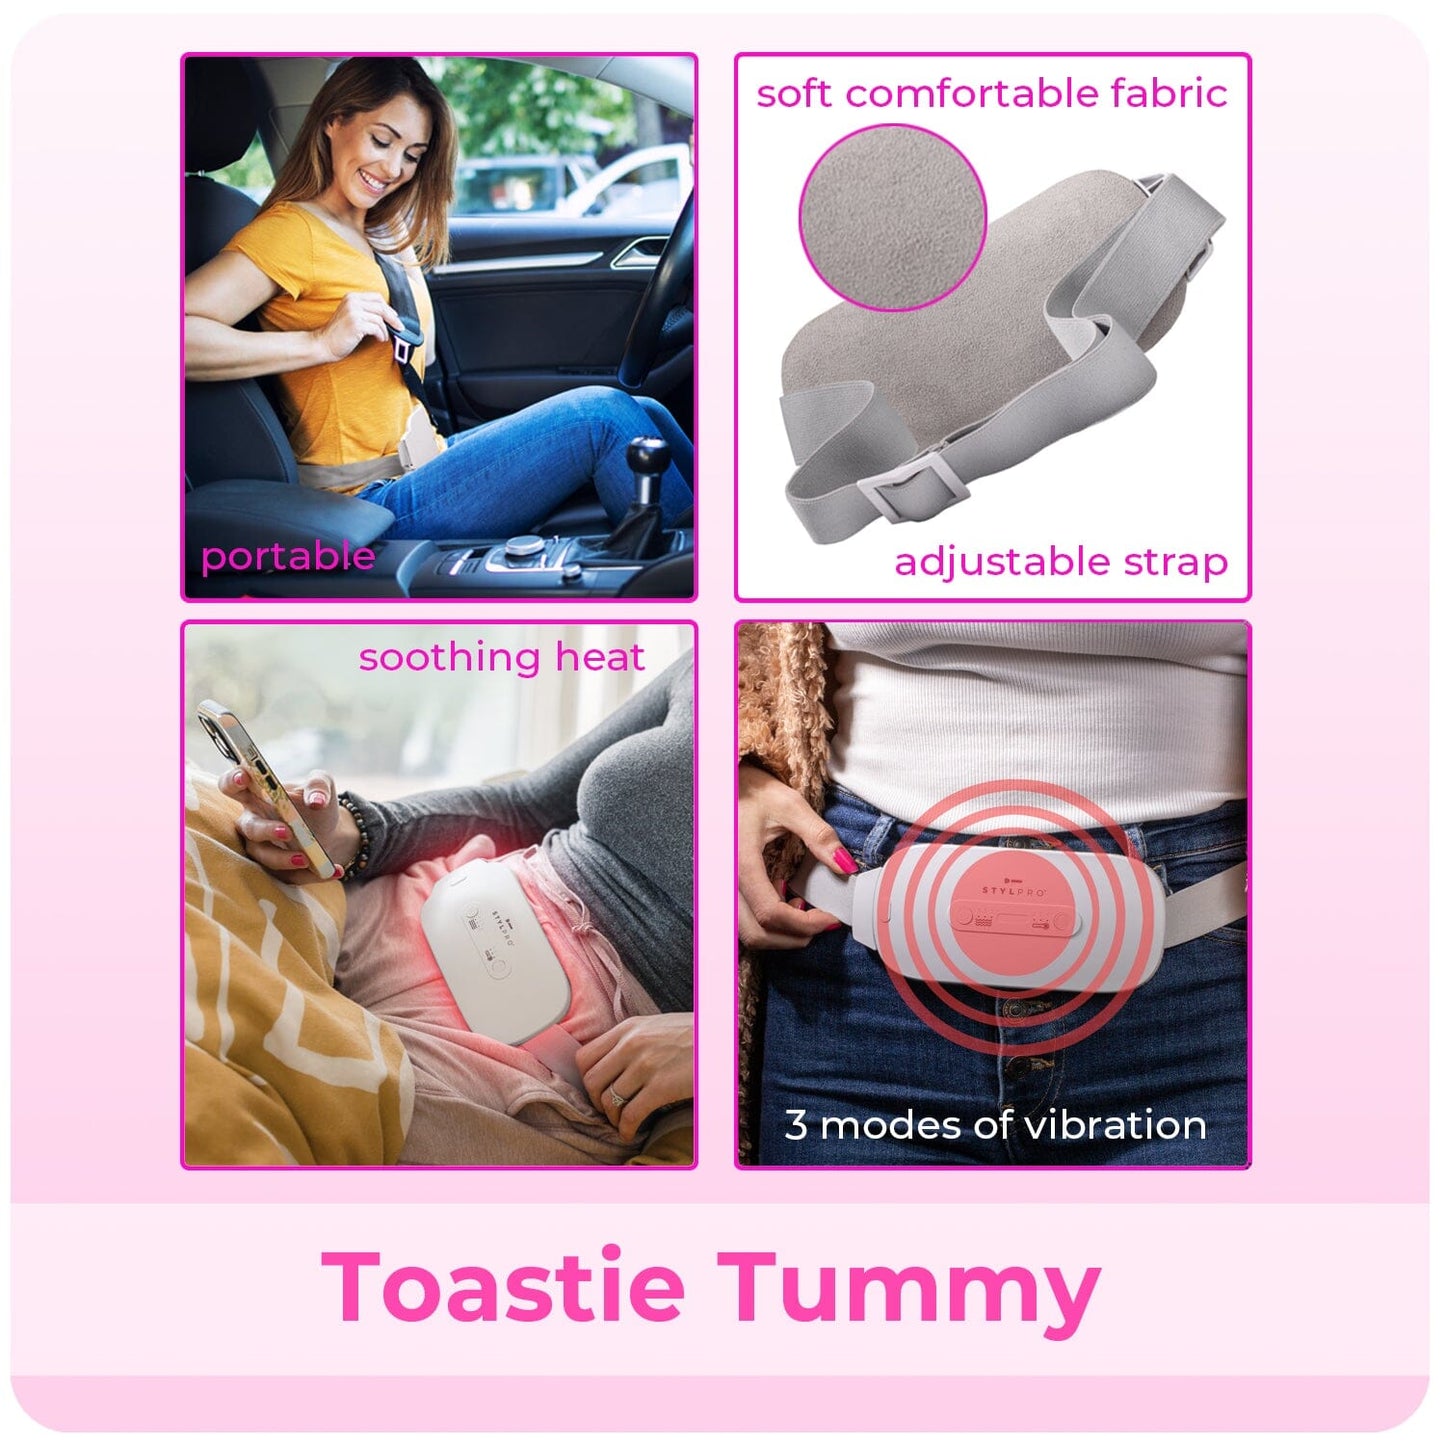 STYLPRO Toastie Tummy Period Cramp Soother